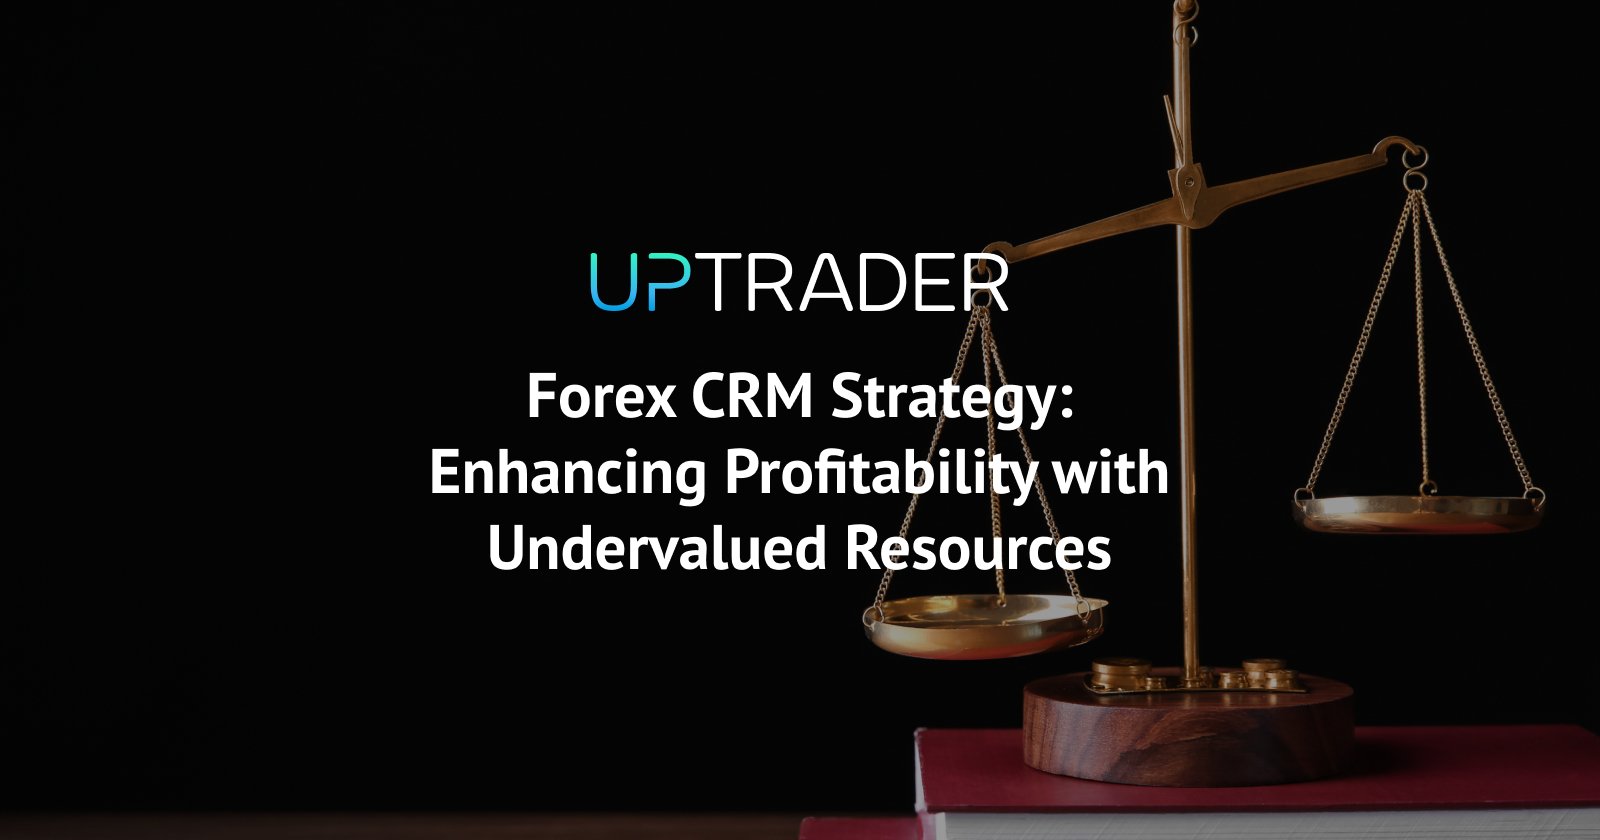 Forex CRM Strategy: Enhancing Profitability with Undervalued Resources